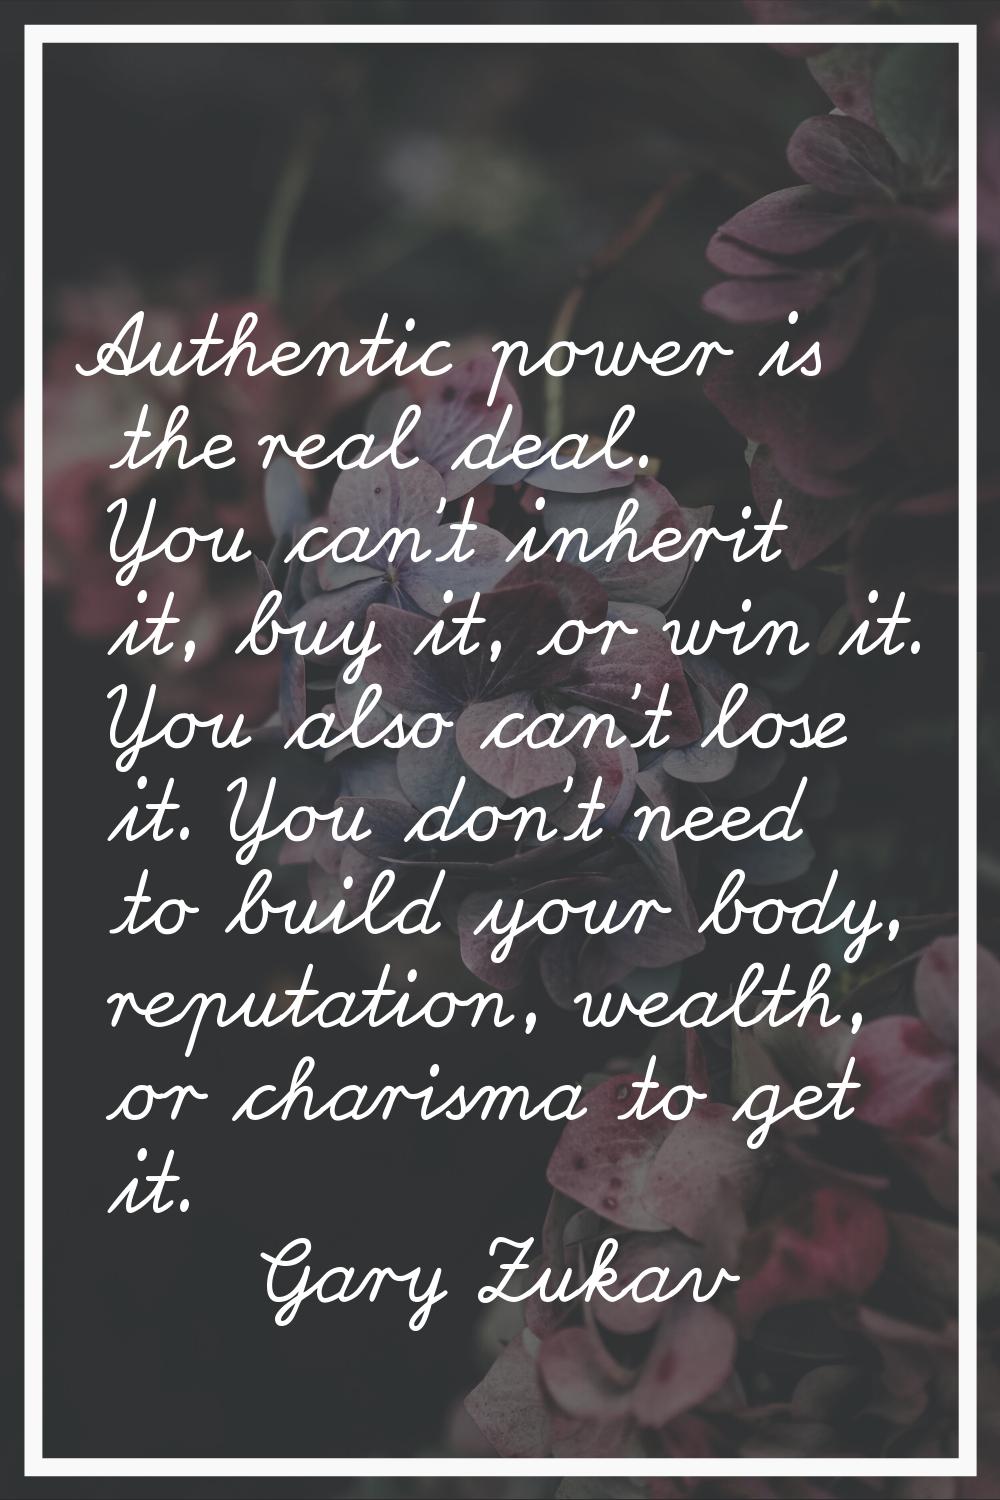 Authentic power is the real deal. You can't inherit it, buy it, or win it. You also can't lose it. 